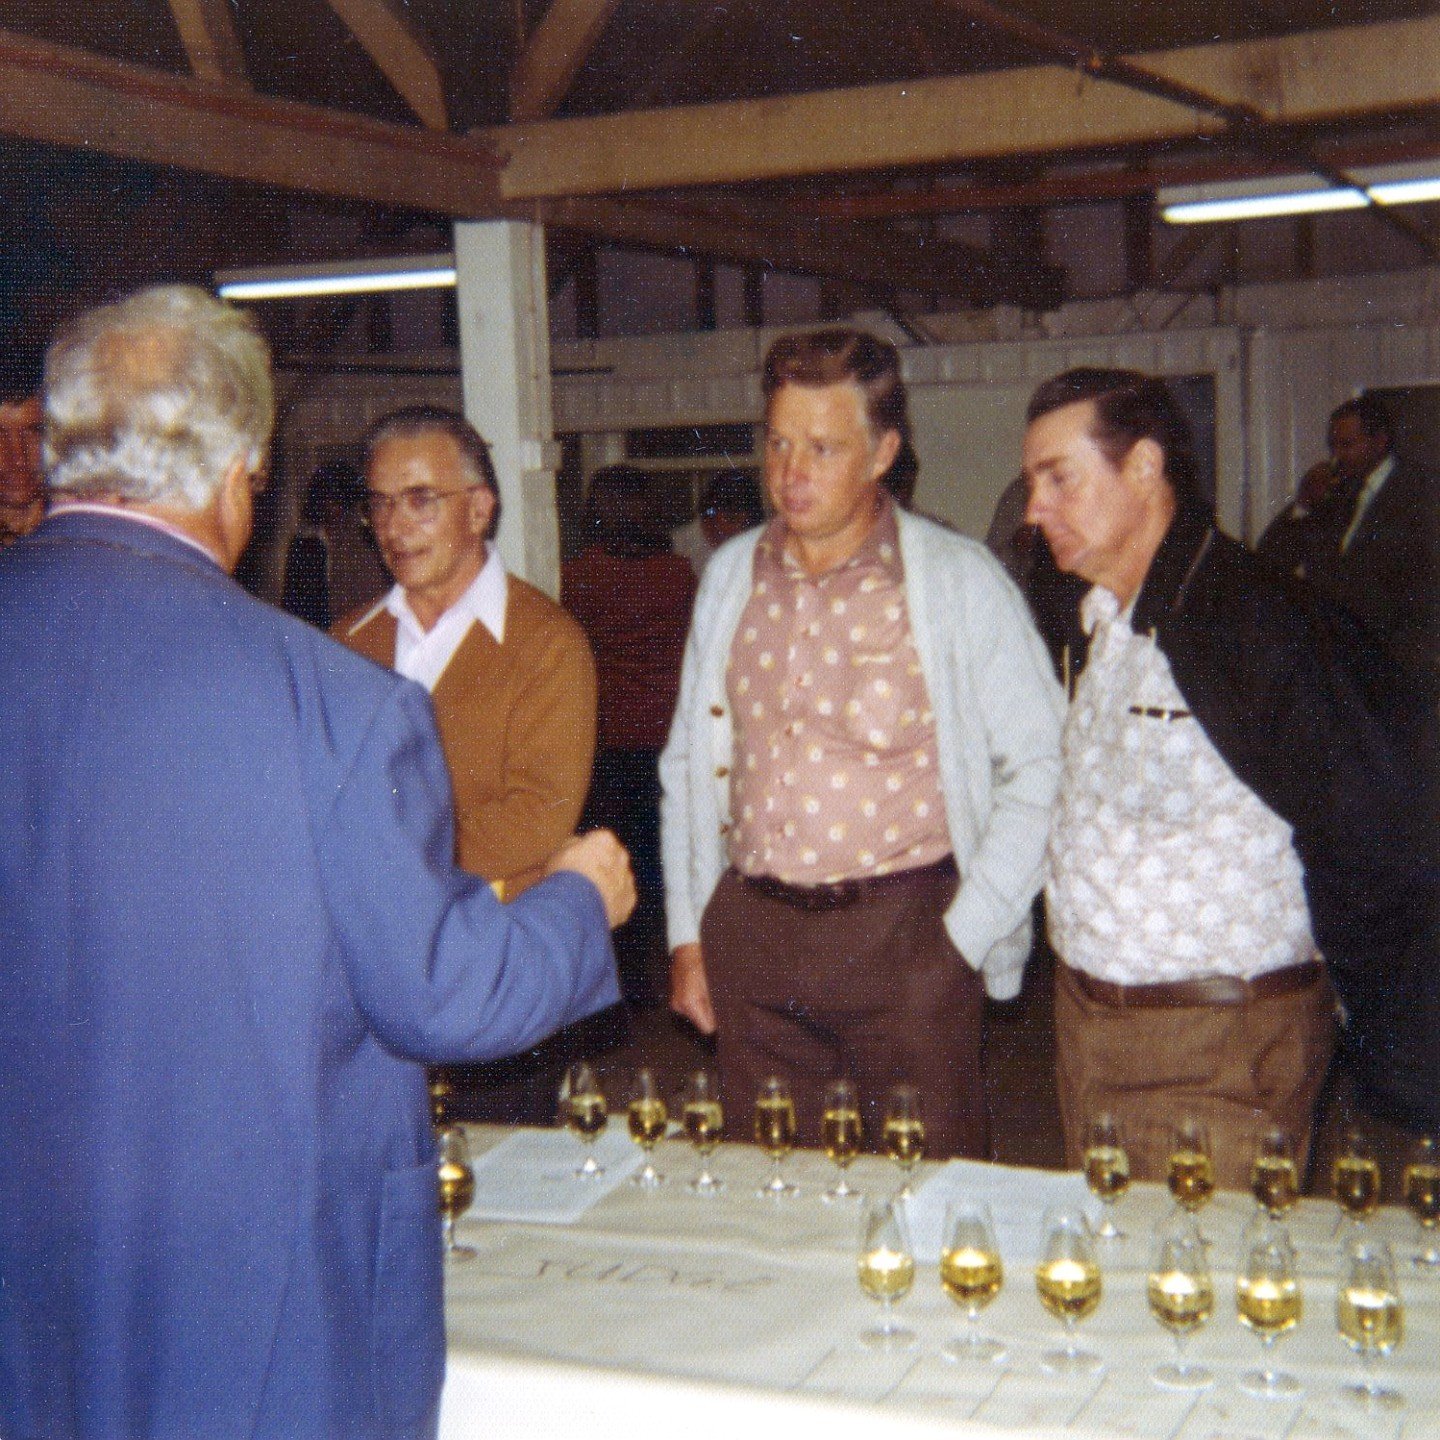 The 1978 Hunter Valley Wine Show was held on May 26th and 27th. It attracted 239 entries in 10 classes, with the Show Committee Chairman, Robert Drinan, telling the Singleton Argus that entries were received from the Hunter, Cowra, and Mudgee winerie